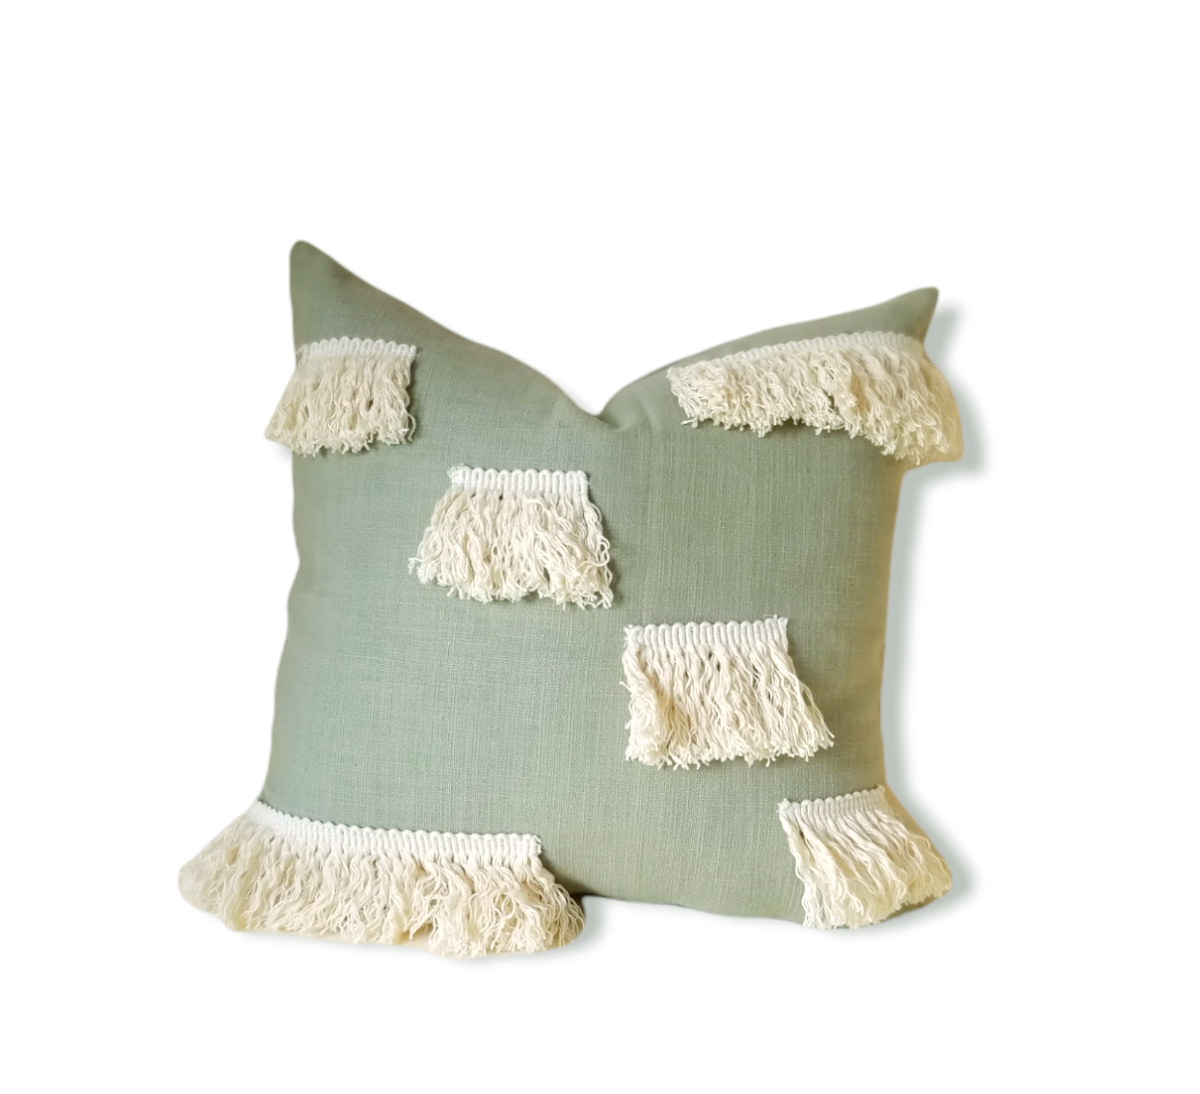   Add a touch of bohemian luxe to your home decor with this gorgeous blend of olive green and beige! This handmade decorative pillow is sure to add a beautiful, unique style to your space. Crafted with exquisite fabric and sealed edges, it offers a high level of durability and quality. The invisible zipper ensures convenience in cleaning, so you can enjoy your luxurious design for years to come.  Advenique Home Decor